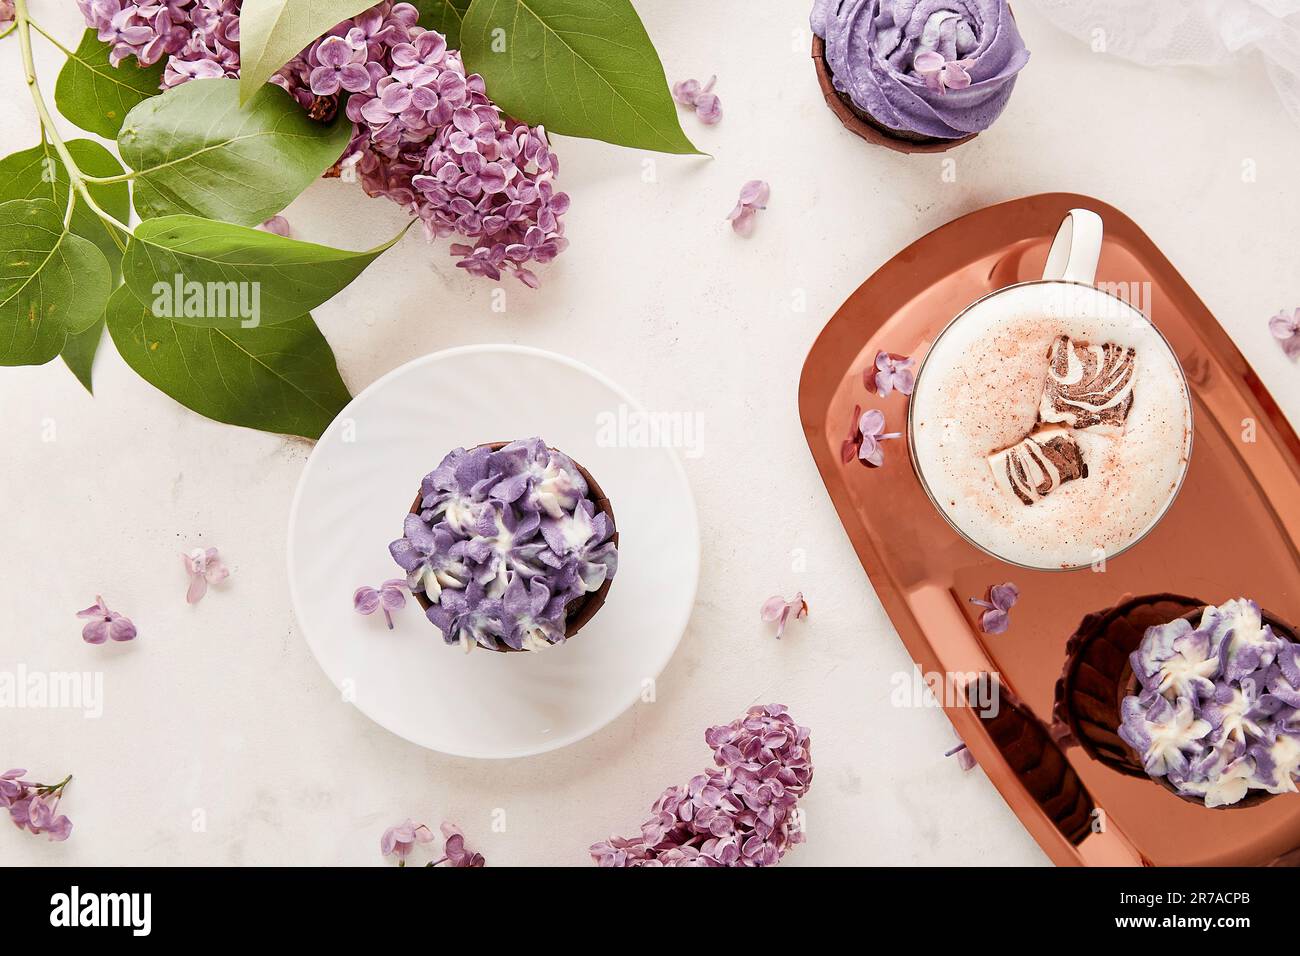 Floral purple cupcakes desserts, coffee cup with melted marshmallow among lilac flowers background flat lay Stock Photo